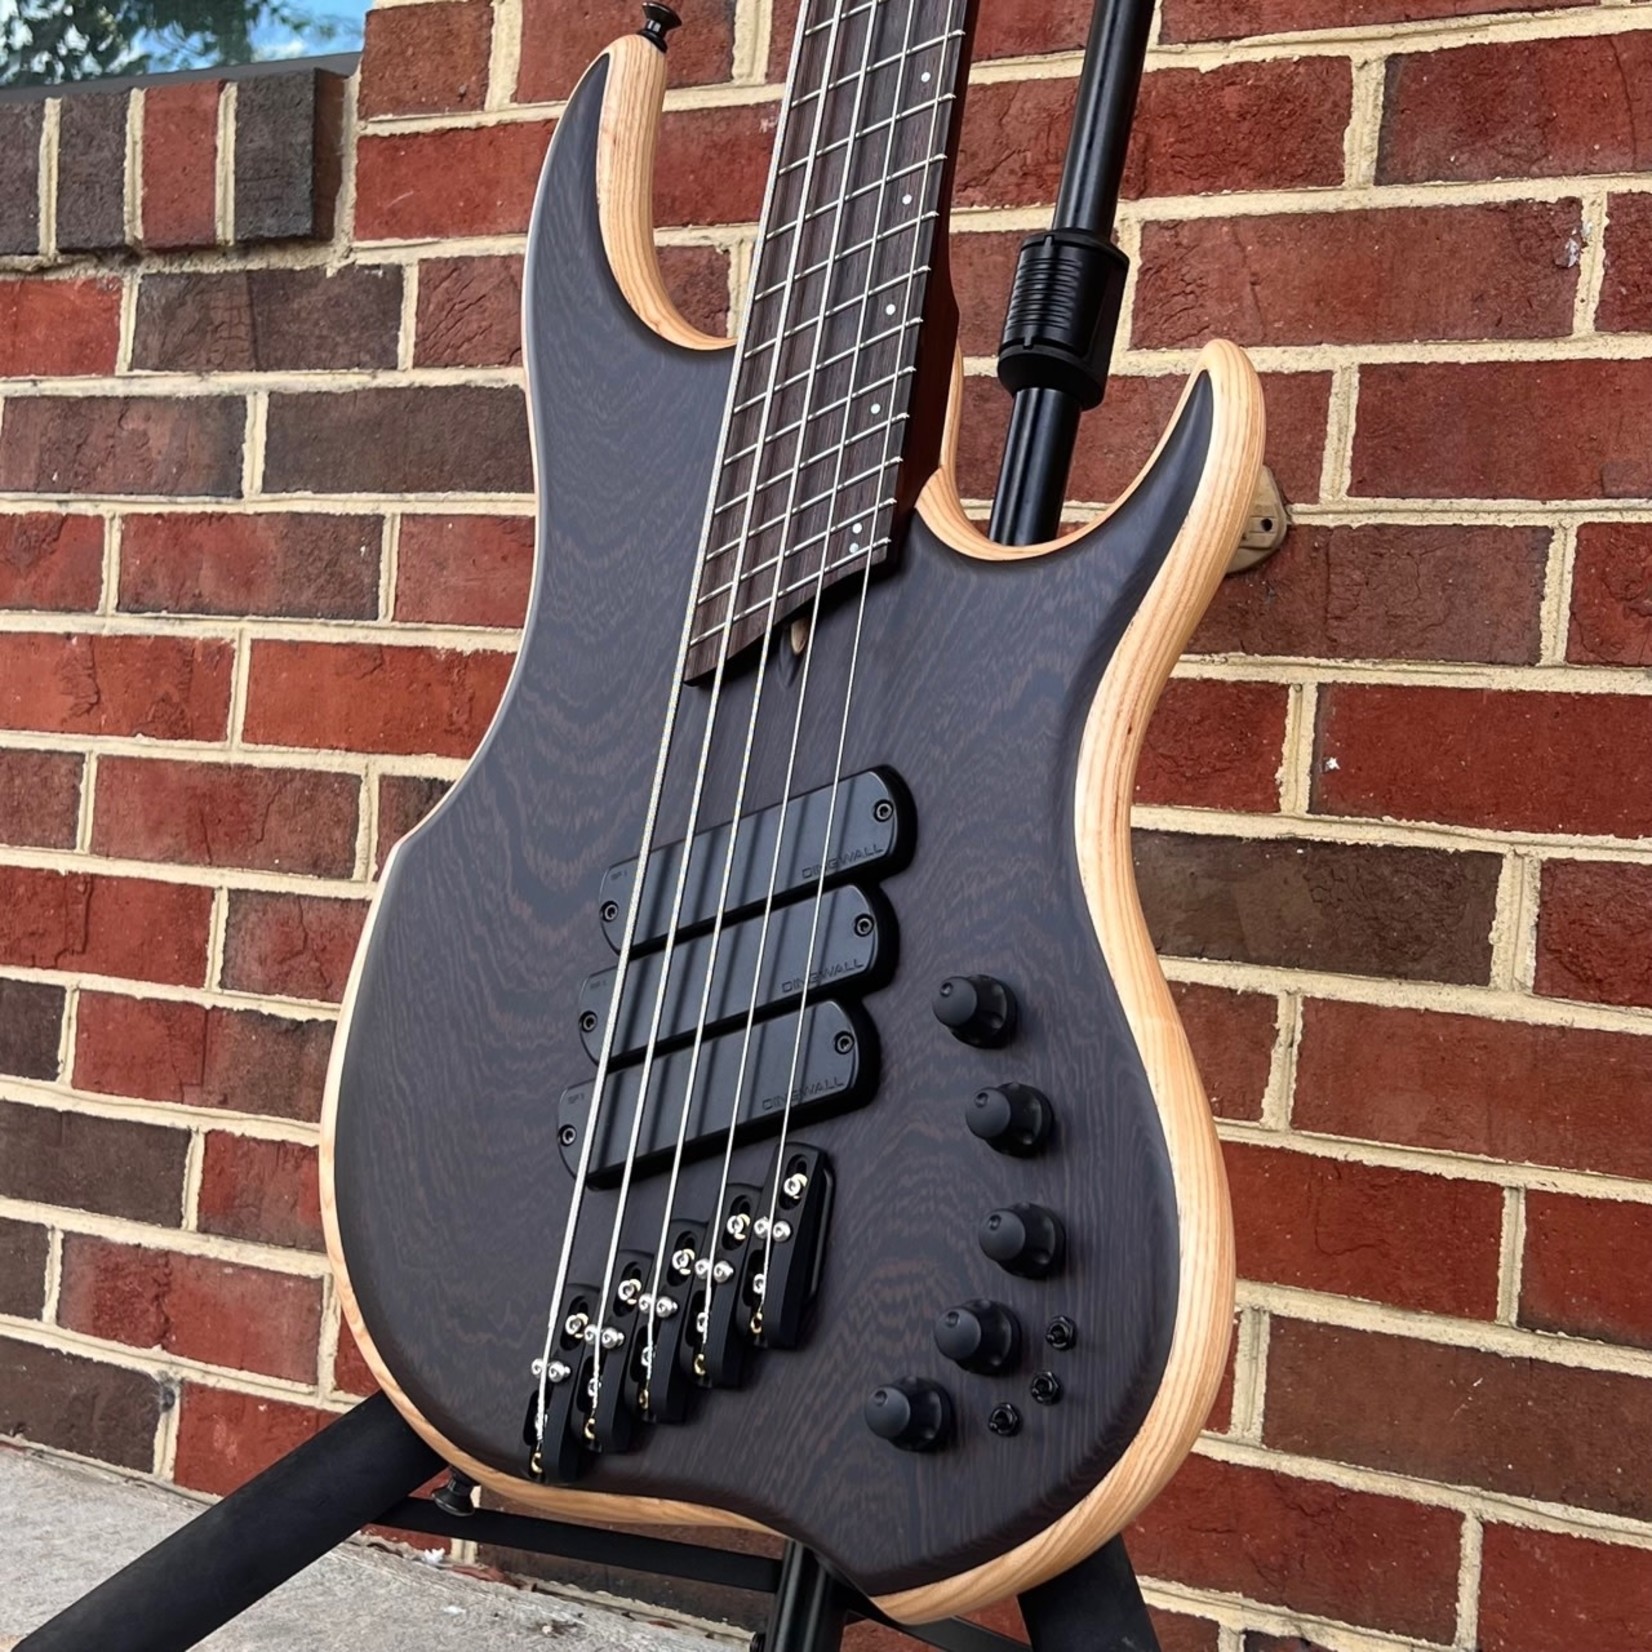 Dingwall Dingwall NAMM 2022 Ltd Ed. Cello Hip Z, 3x Pickups, Wenge X-Top, Dual Density Swamp Ash Body, Roasted Ash Neck, Wenge Fretboard, Dots w/ 12th Fret D Inlay, Matching Headstock, Glockenklang Preamp w/ Toggles, Gig Bag, SN# 6900